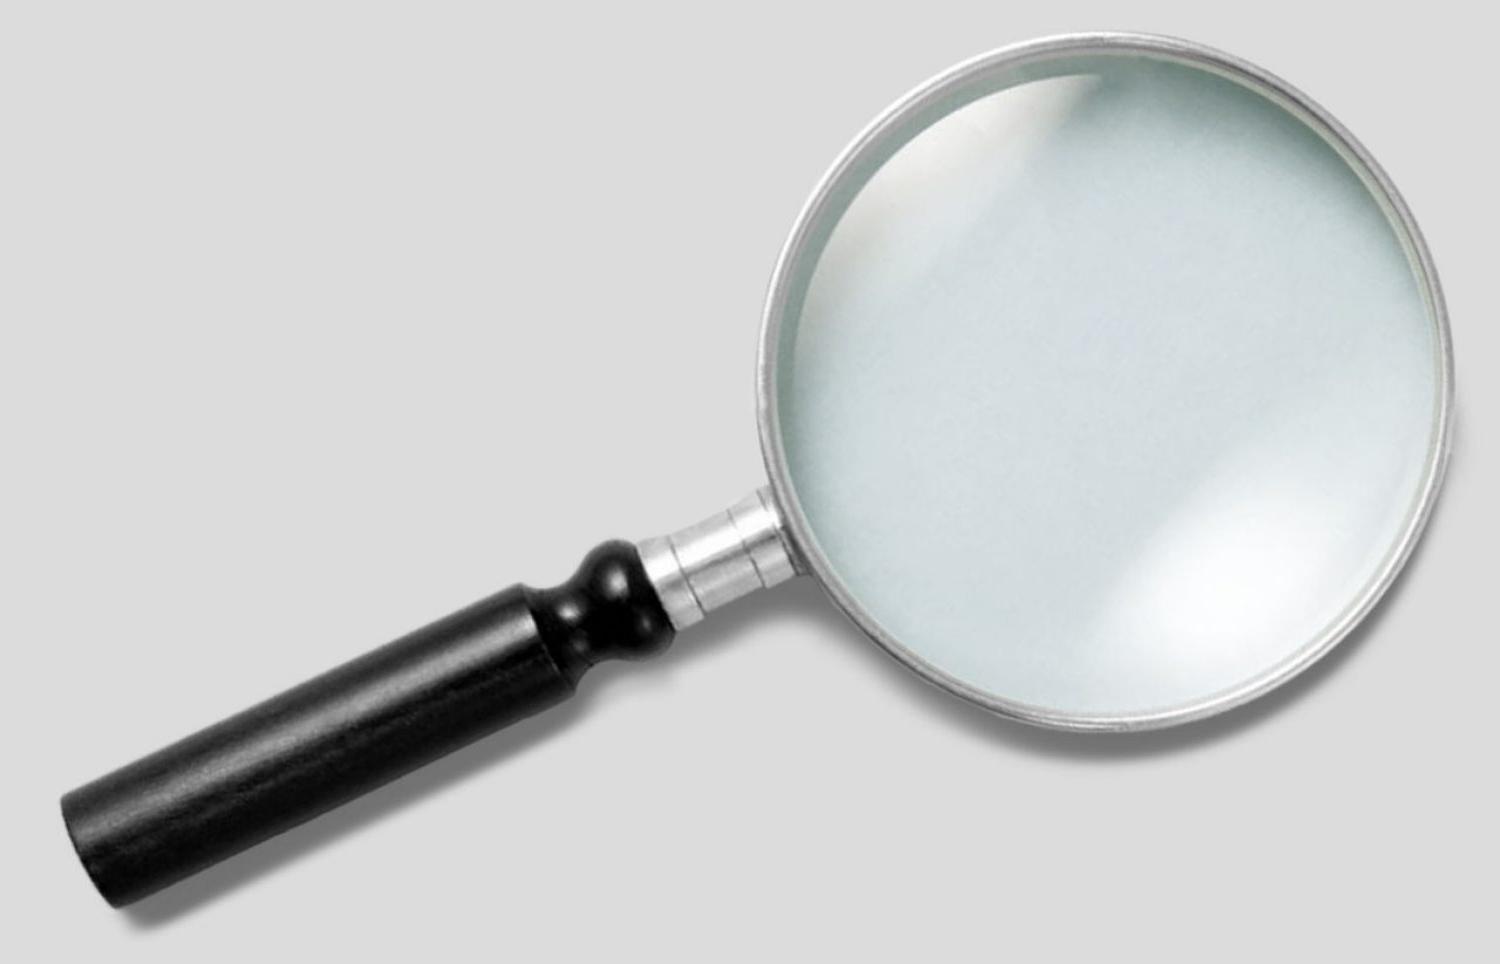 A magnifying glass lays on a solid gray background